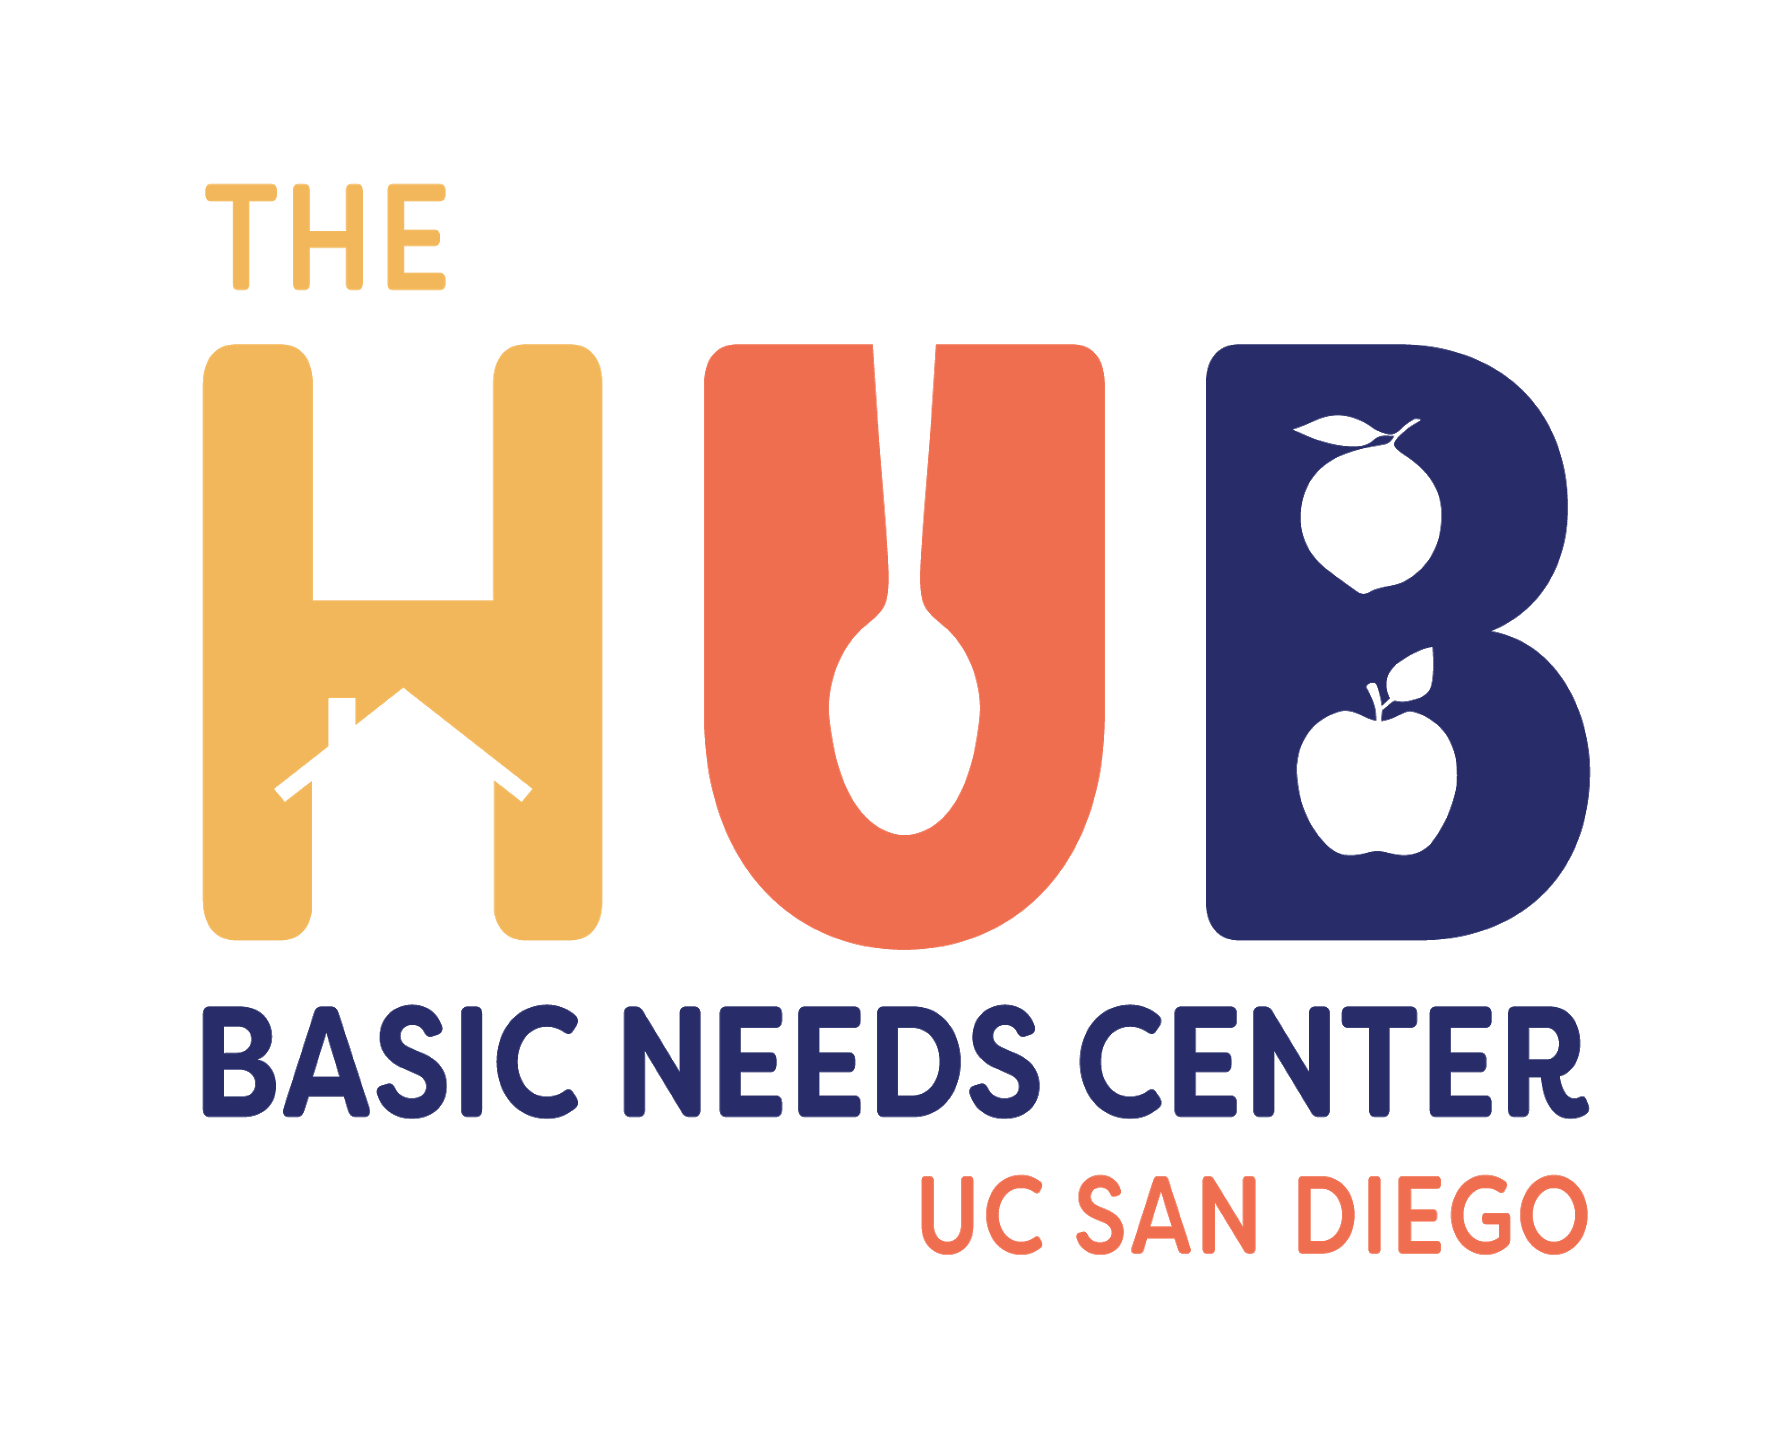 logo of the UCSD Basic Needs Hub, which says 'The Hub - Basic Needs Center - UC San Diego' in yellow, orange, and blue. The shapes of the letters in the word 'Hub' are cut out to look like a square house, a spoon, and two apples.